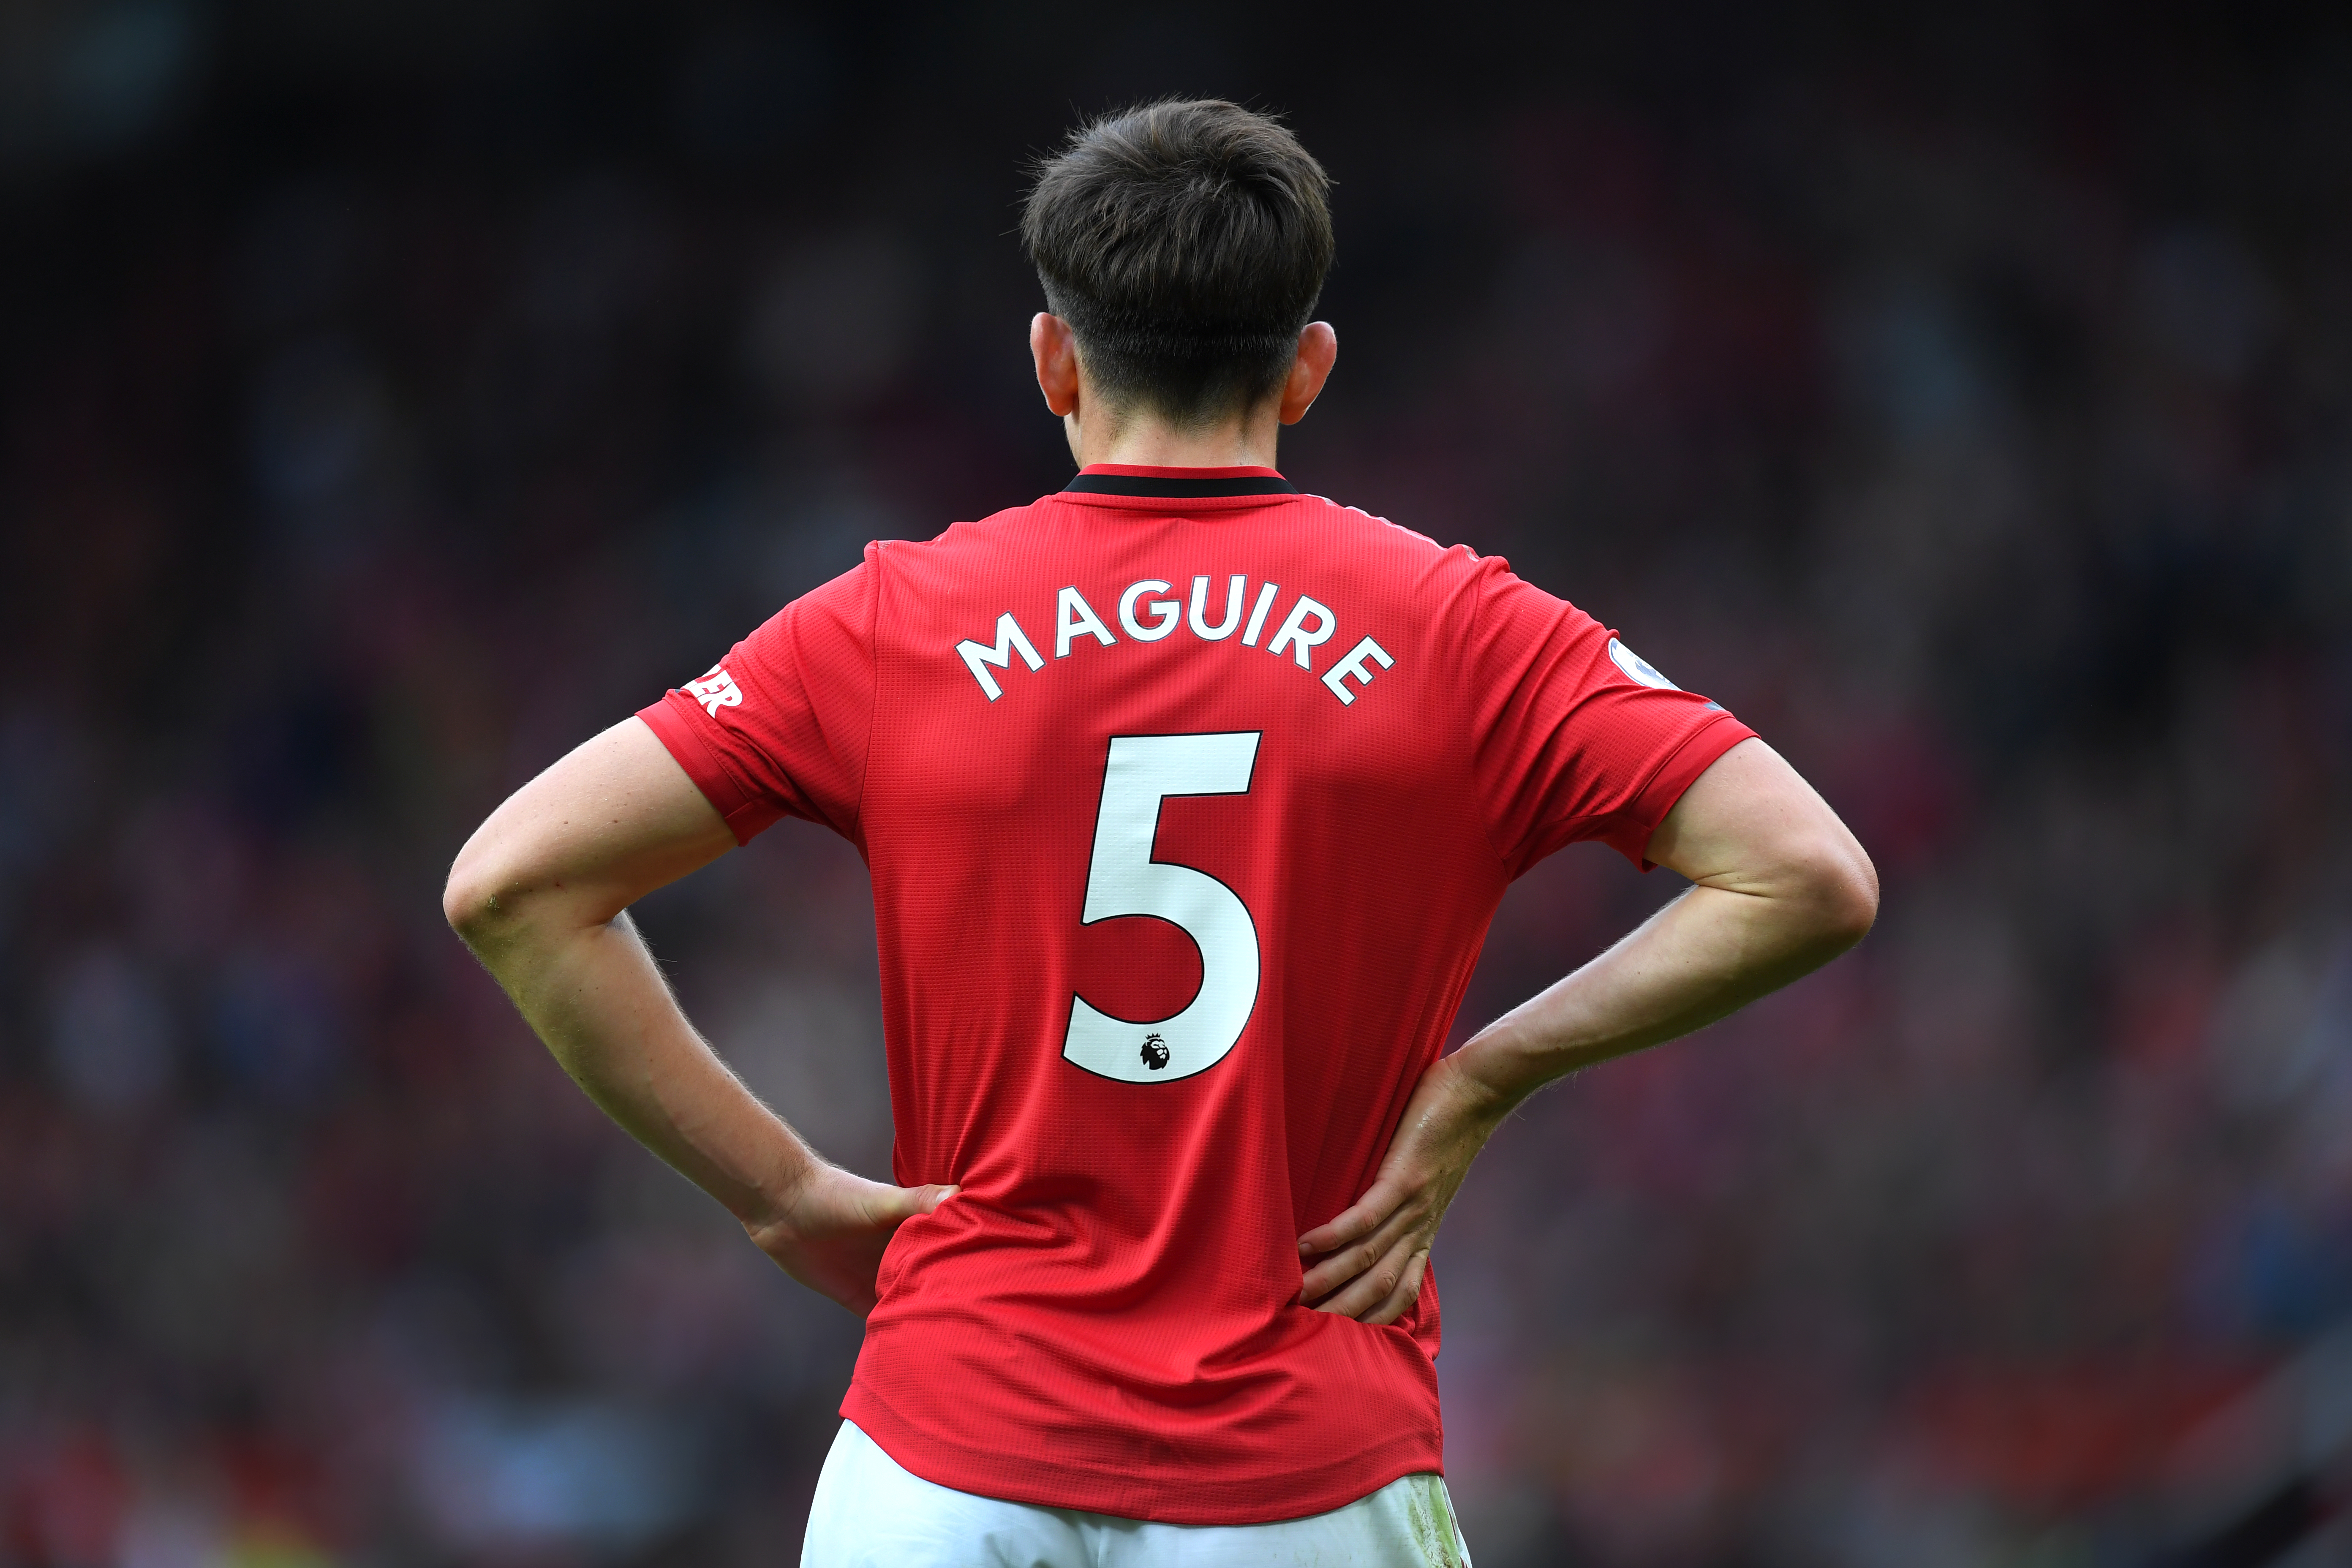 Harry Maguire has struggled for Manchester United this season (Photo by Michael Regan/Getty Images)